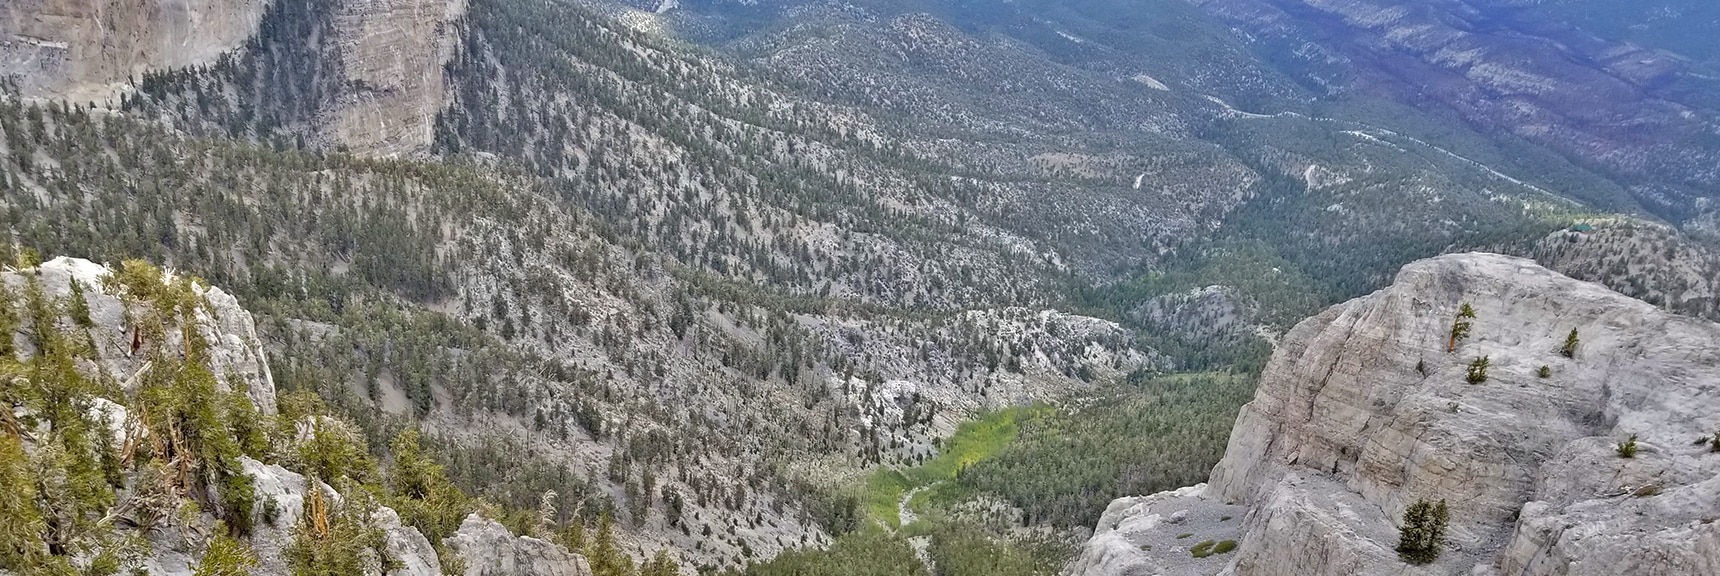 View Down the 1st Branch of the Main Northern Wash Into Lee Canyon | Mummy Mountain Northern Rim Overlook, Spring Mountain Wilderness, Nevada